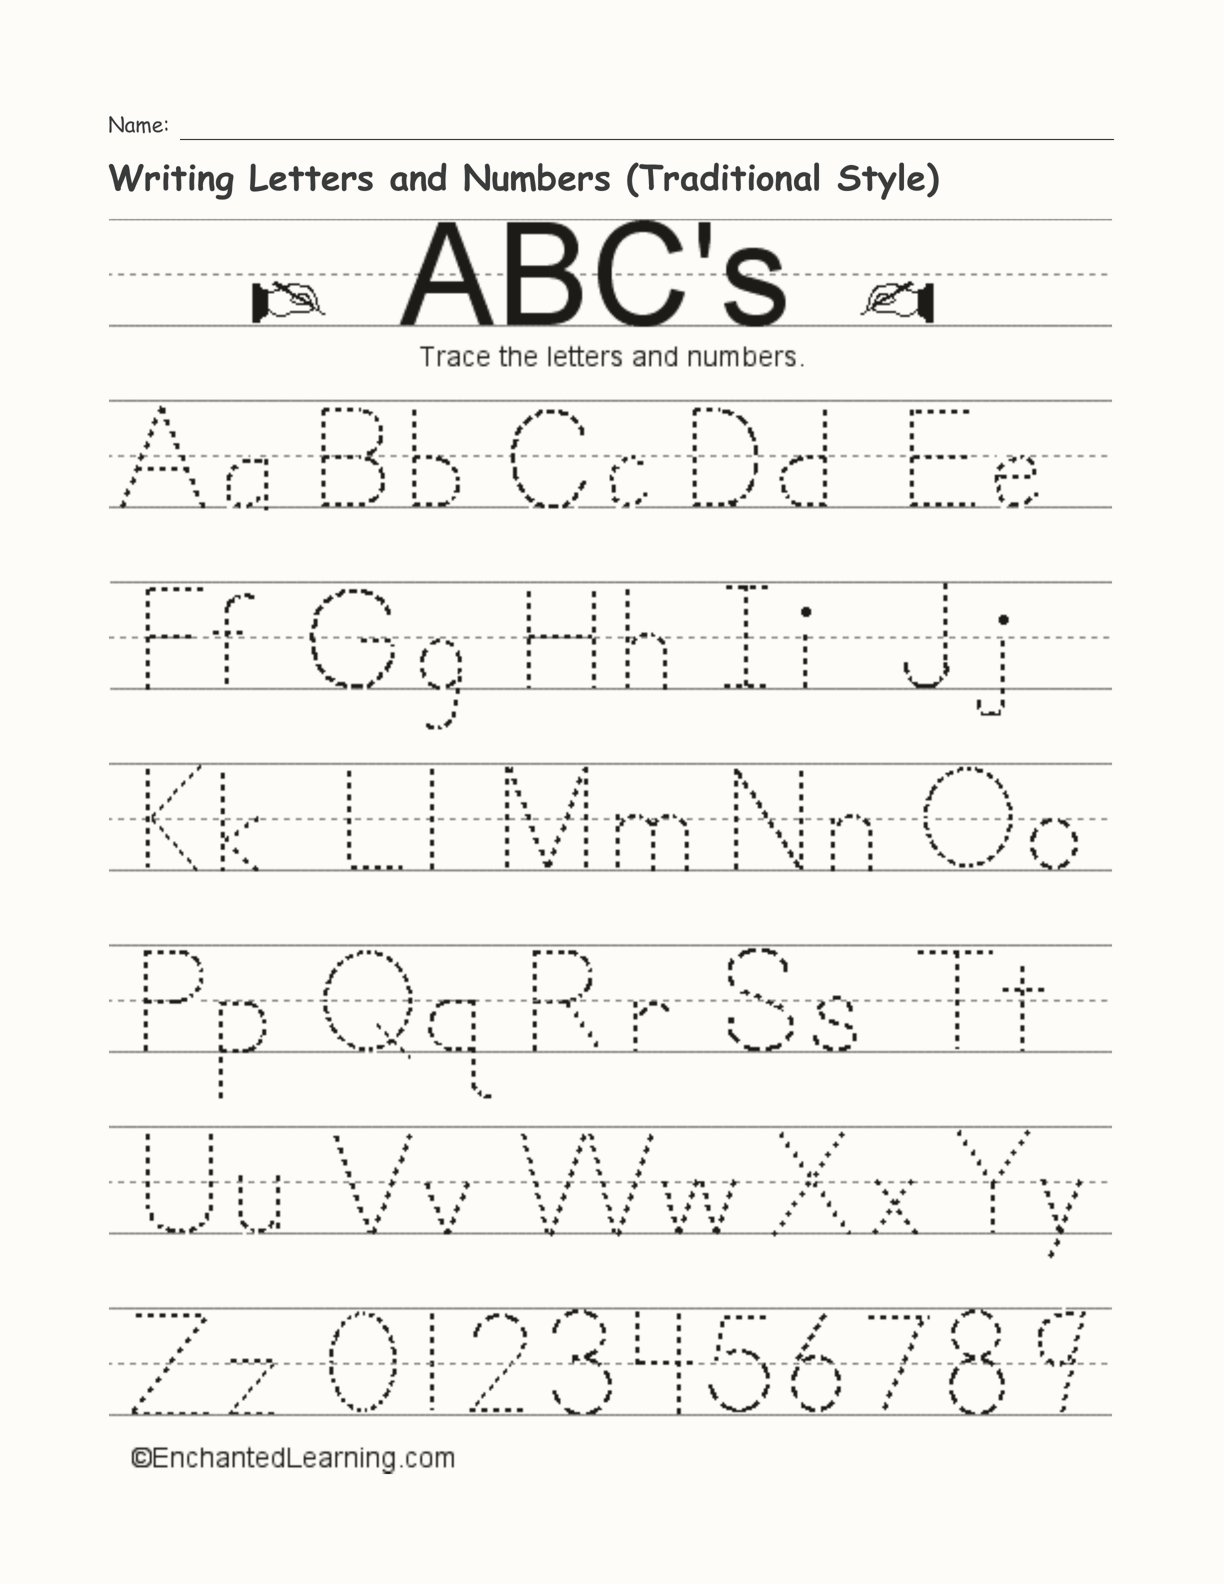 Writing Letters and Numbers (Traditional Style) interactive worksheet page 1